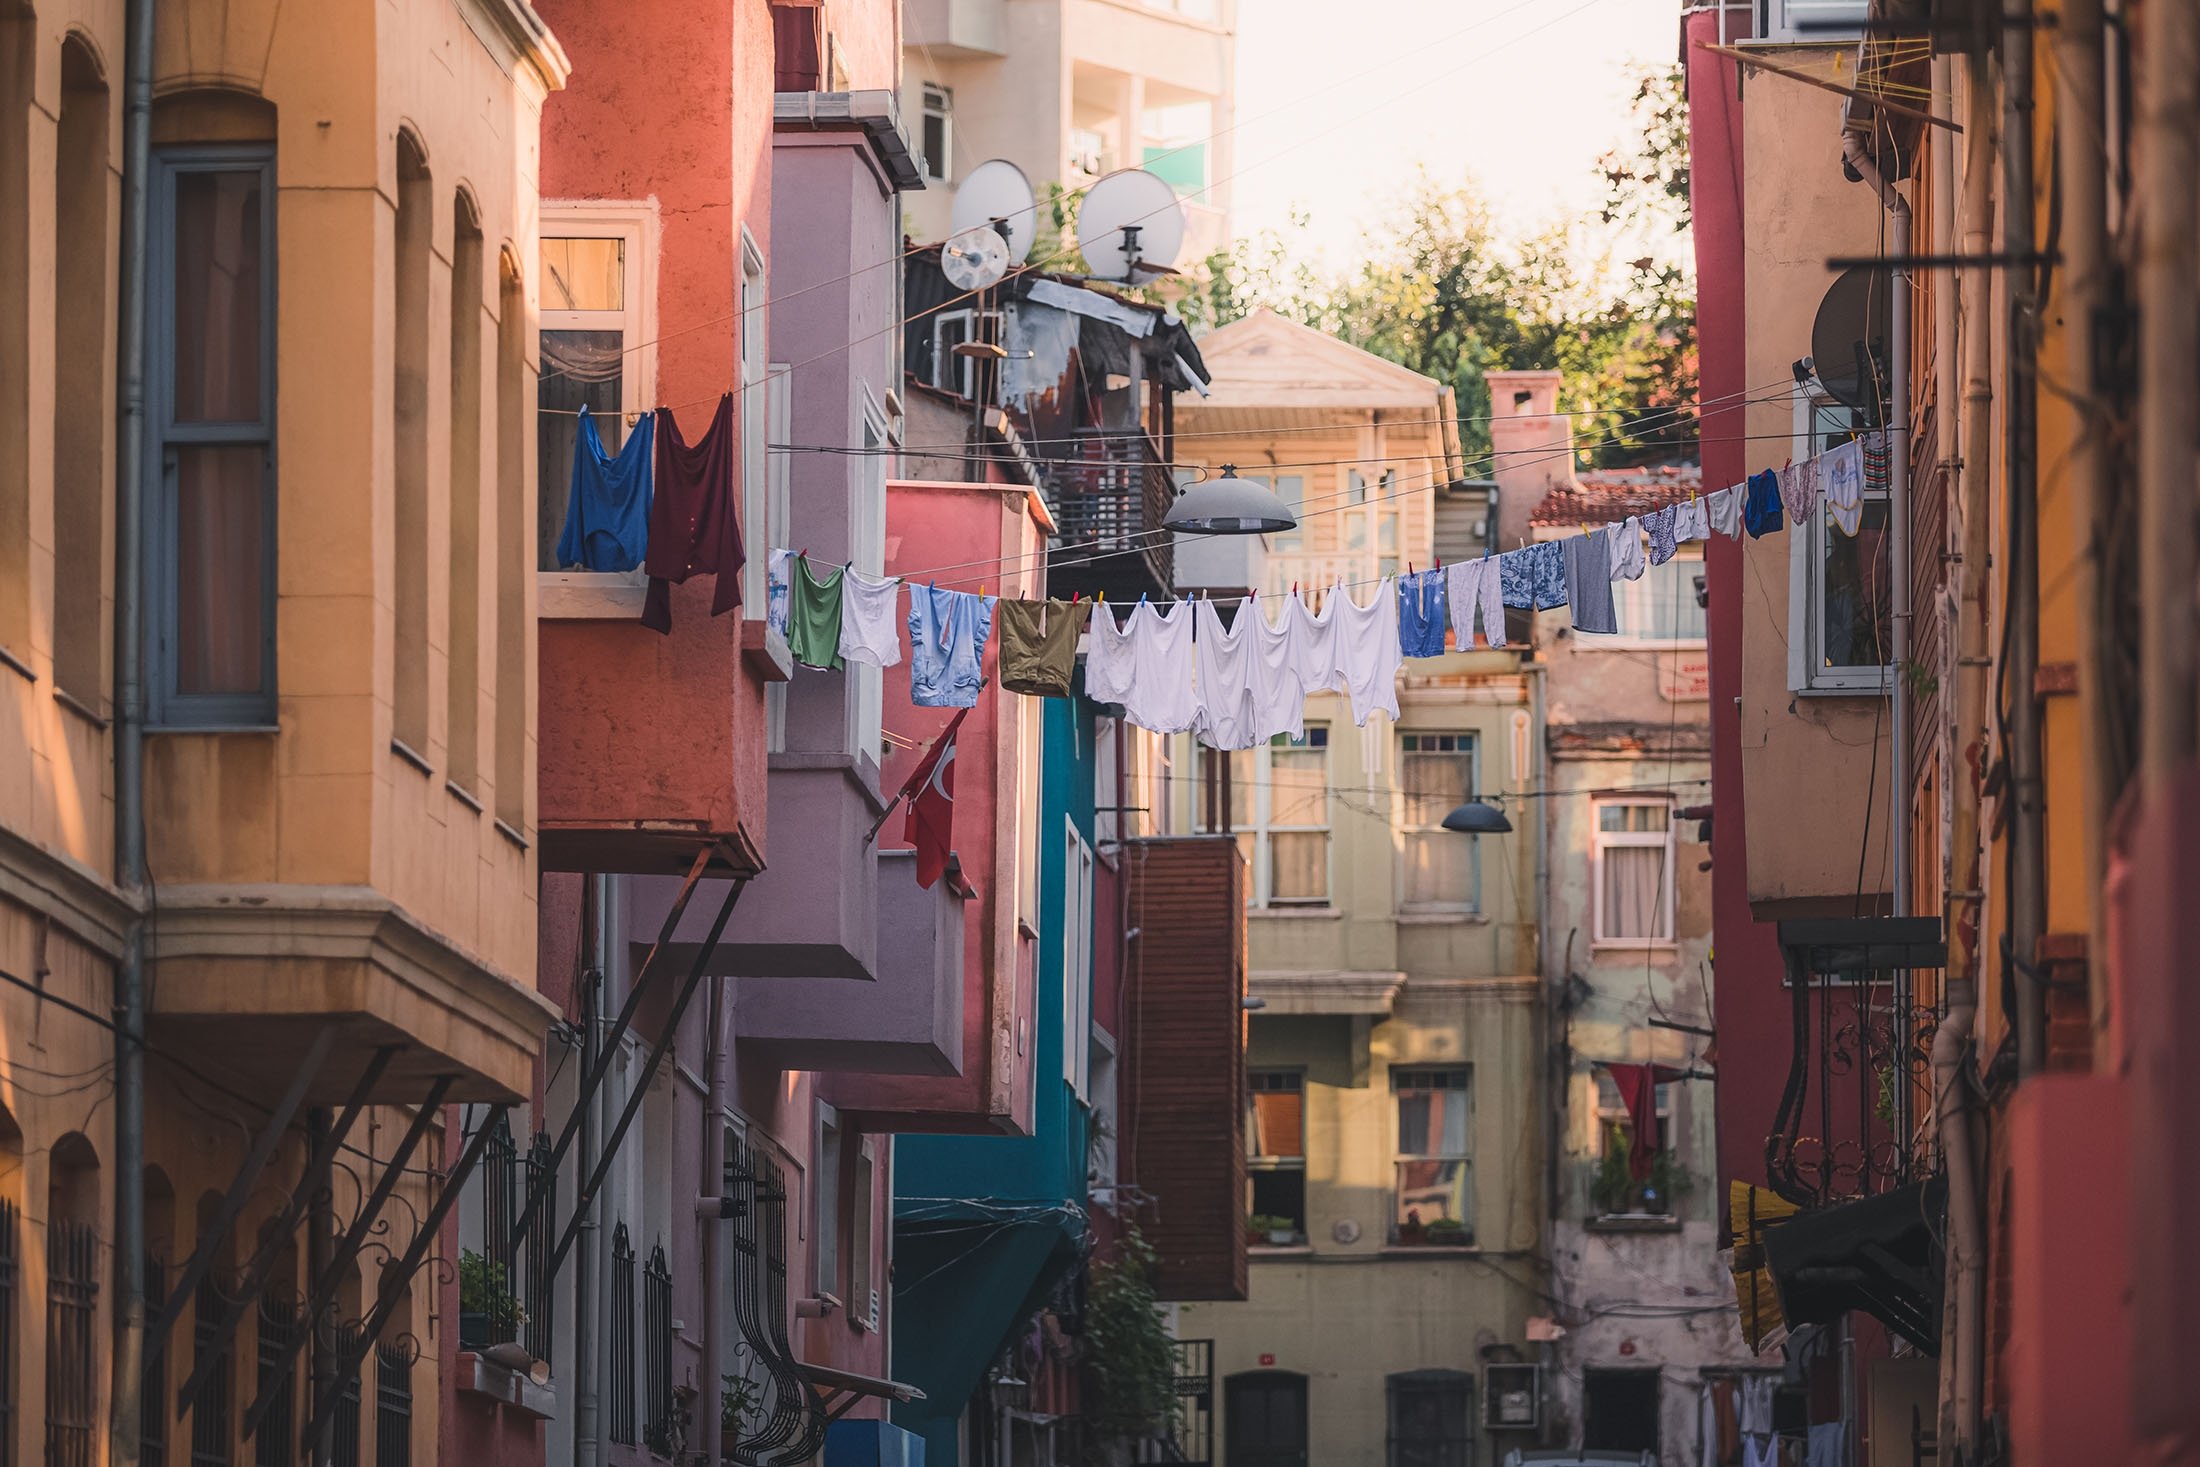 Laundry hung to dry amid cumba houses in the authentic and multicultural Istanbul neighborhood of Balat. (Shutterstock Photo)